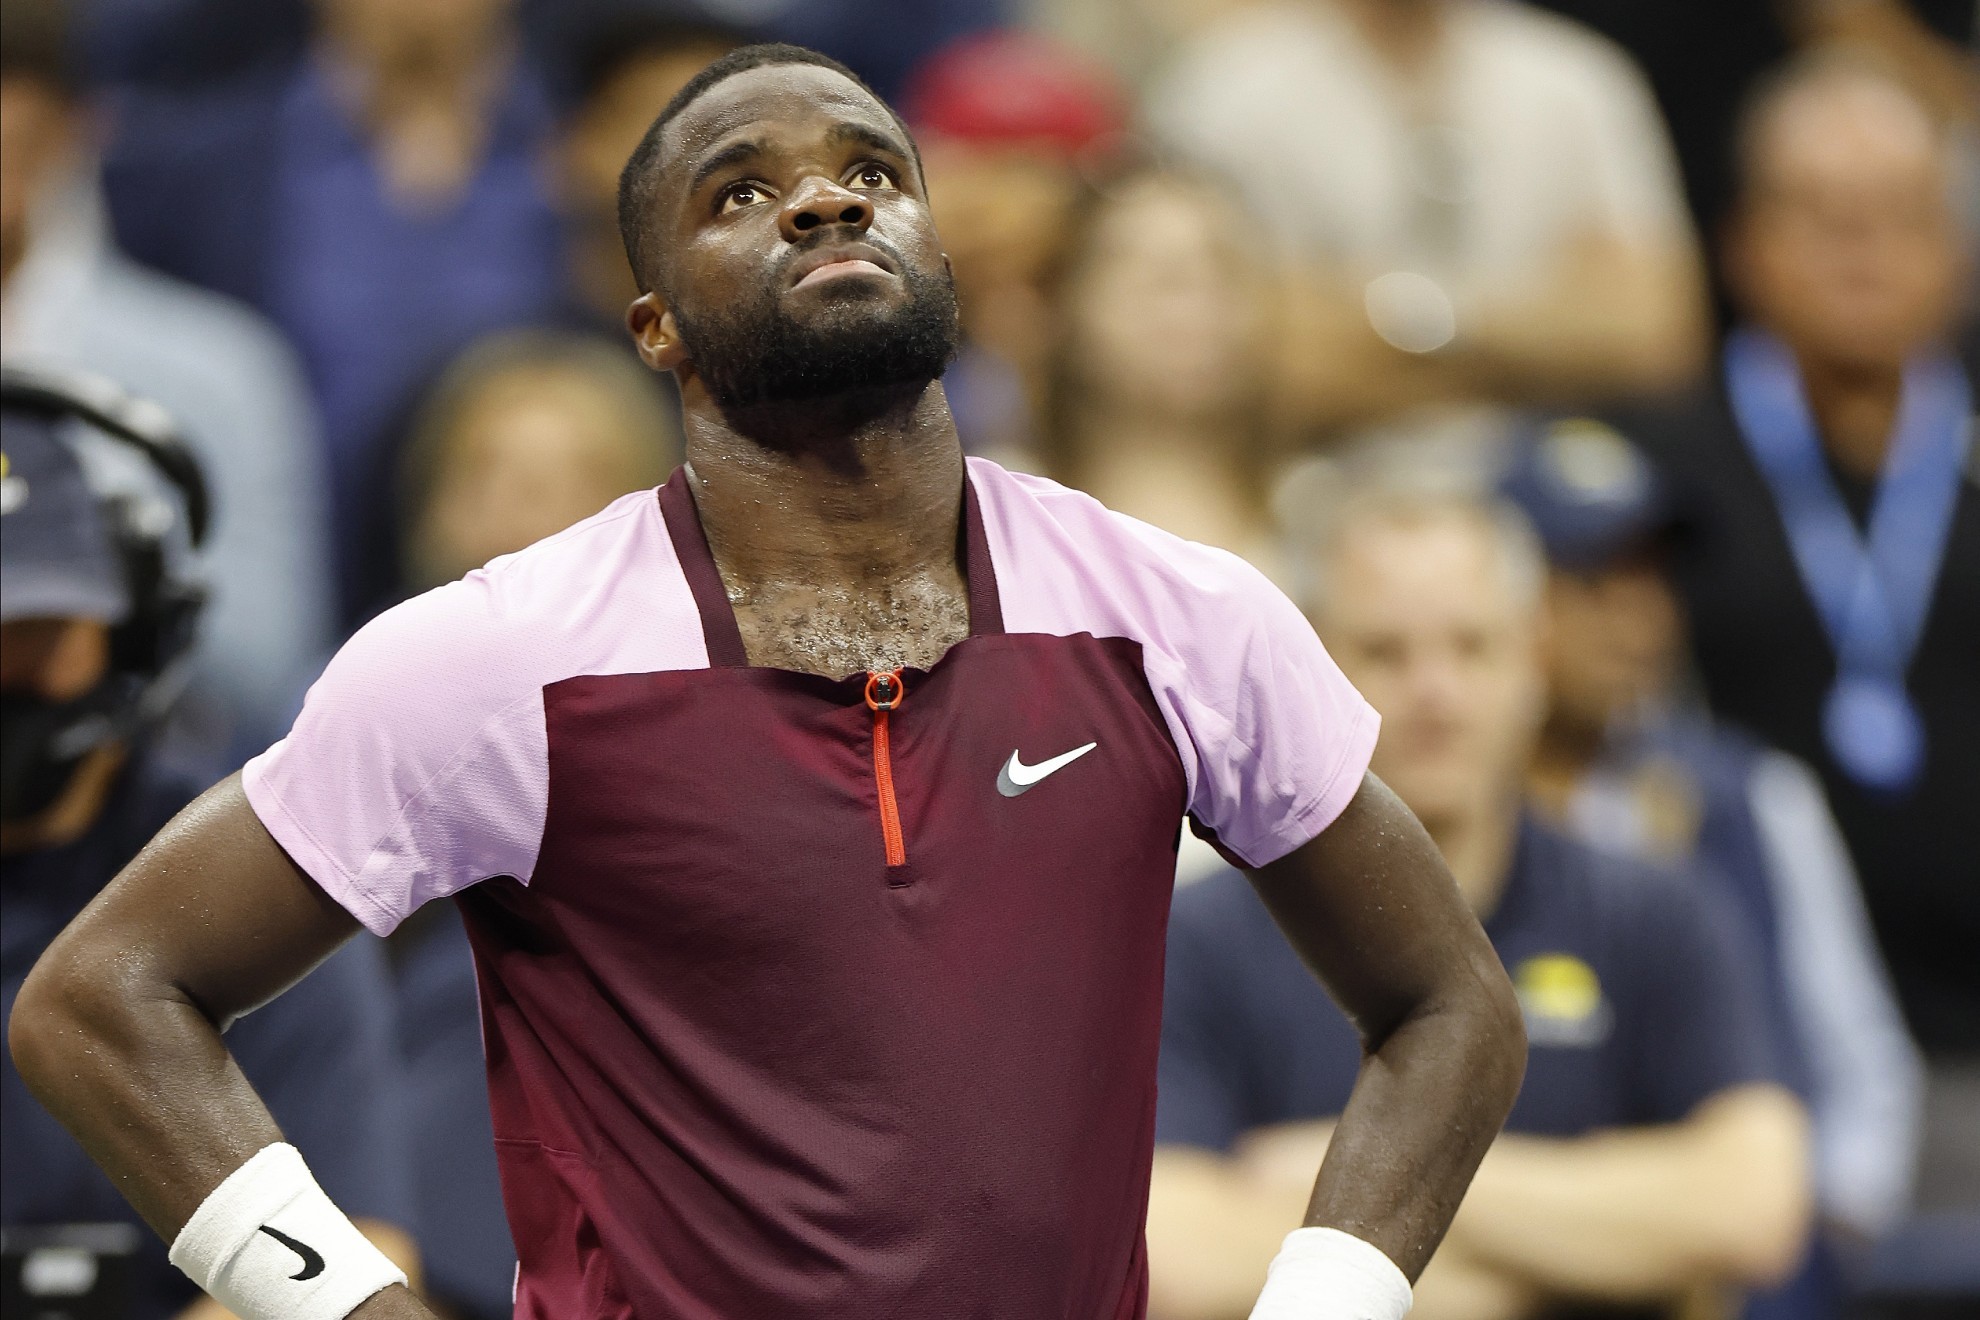 Frances Tiafoe gives tearful interview after losing US Open semi-final to Alcaraz